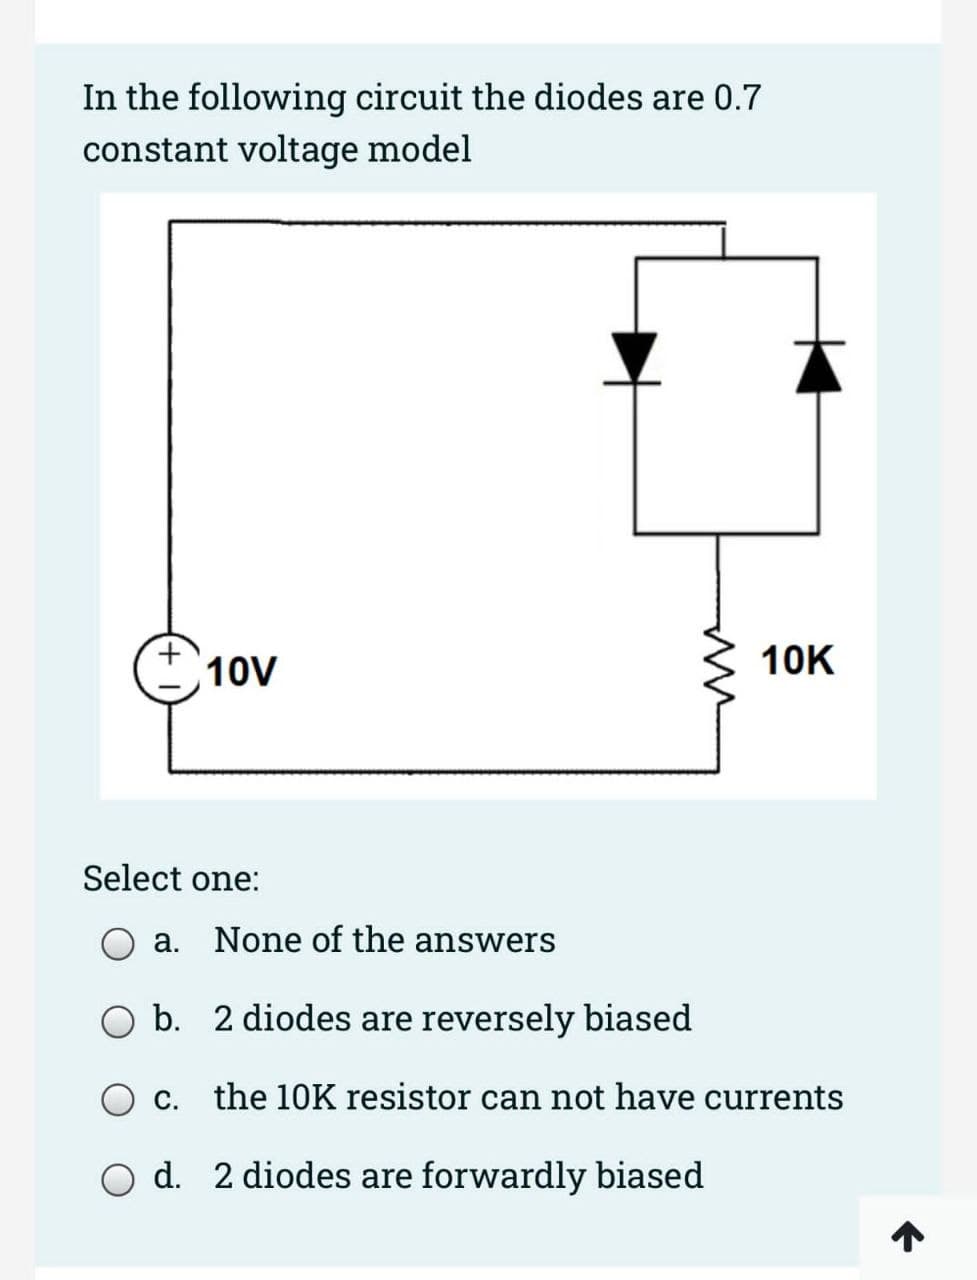 In the following circuit the diodes are 0.7
constant voltage model
10V
Select one:
C.
m
10K
a. None of the answers
b. 2 diodes are reversely biased
the 10K resistor can not have currents
d. 2 diodes are forwardly biased